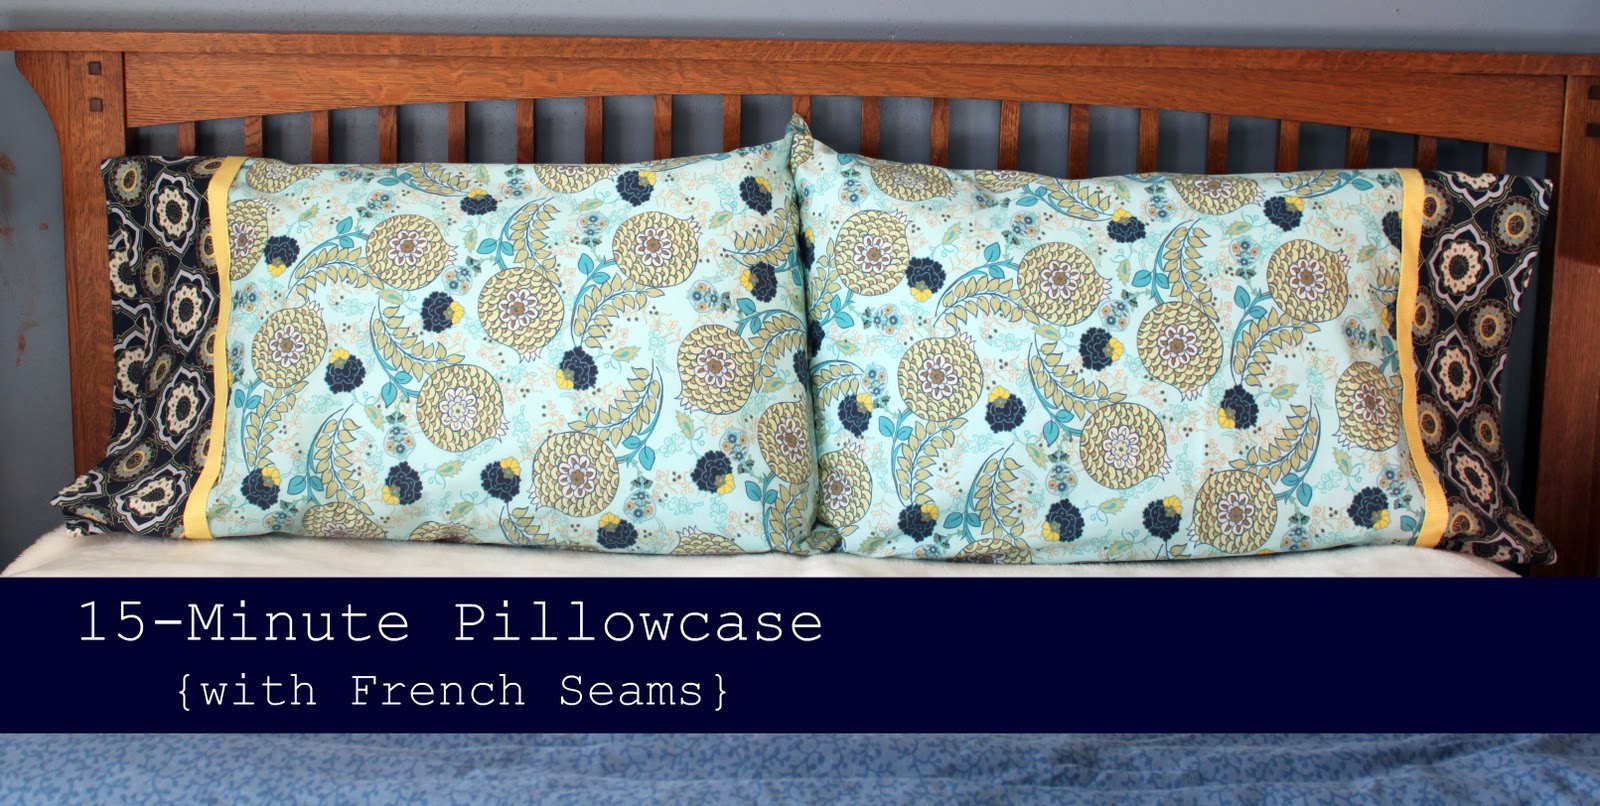 15-Minute Pillowcase with French Seams Tutorial.